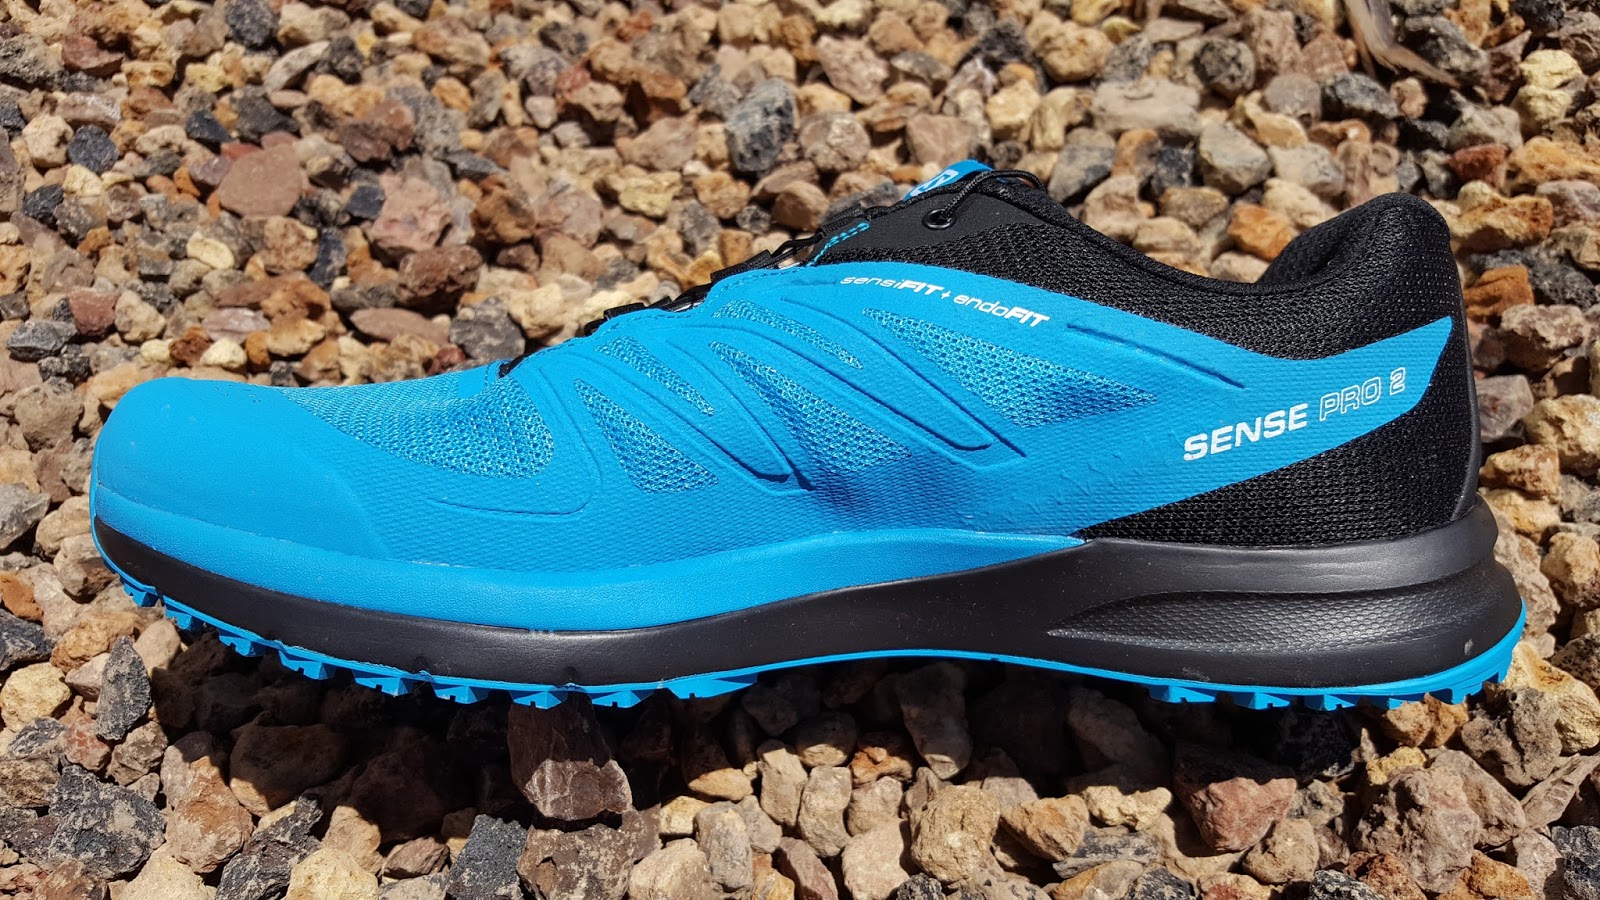 skotsk Isse hjul Running Without Injuries: Salomon Sense Pro-2 and Park Shirt Review